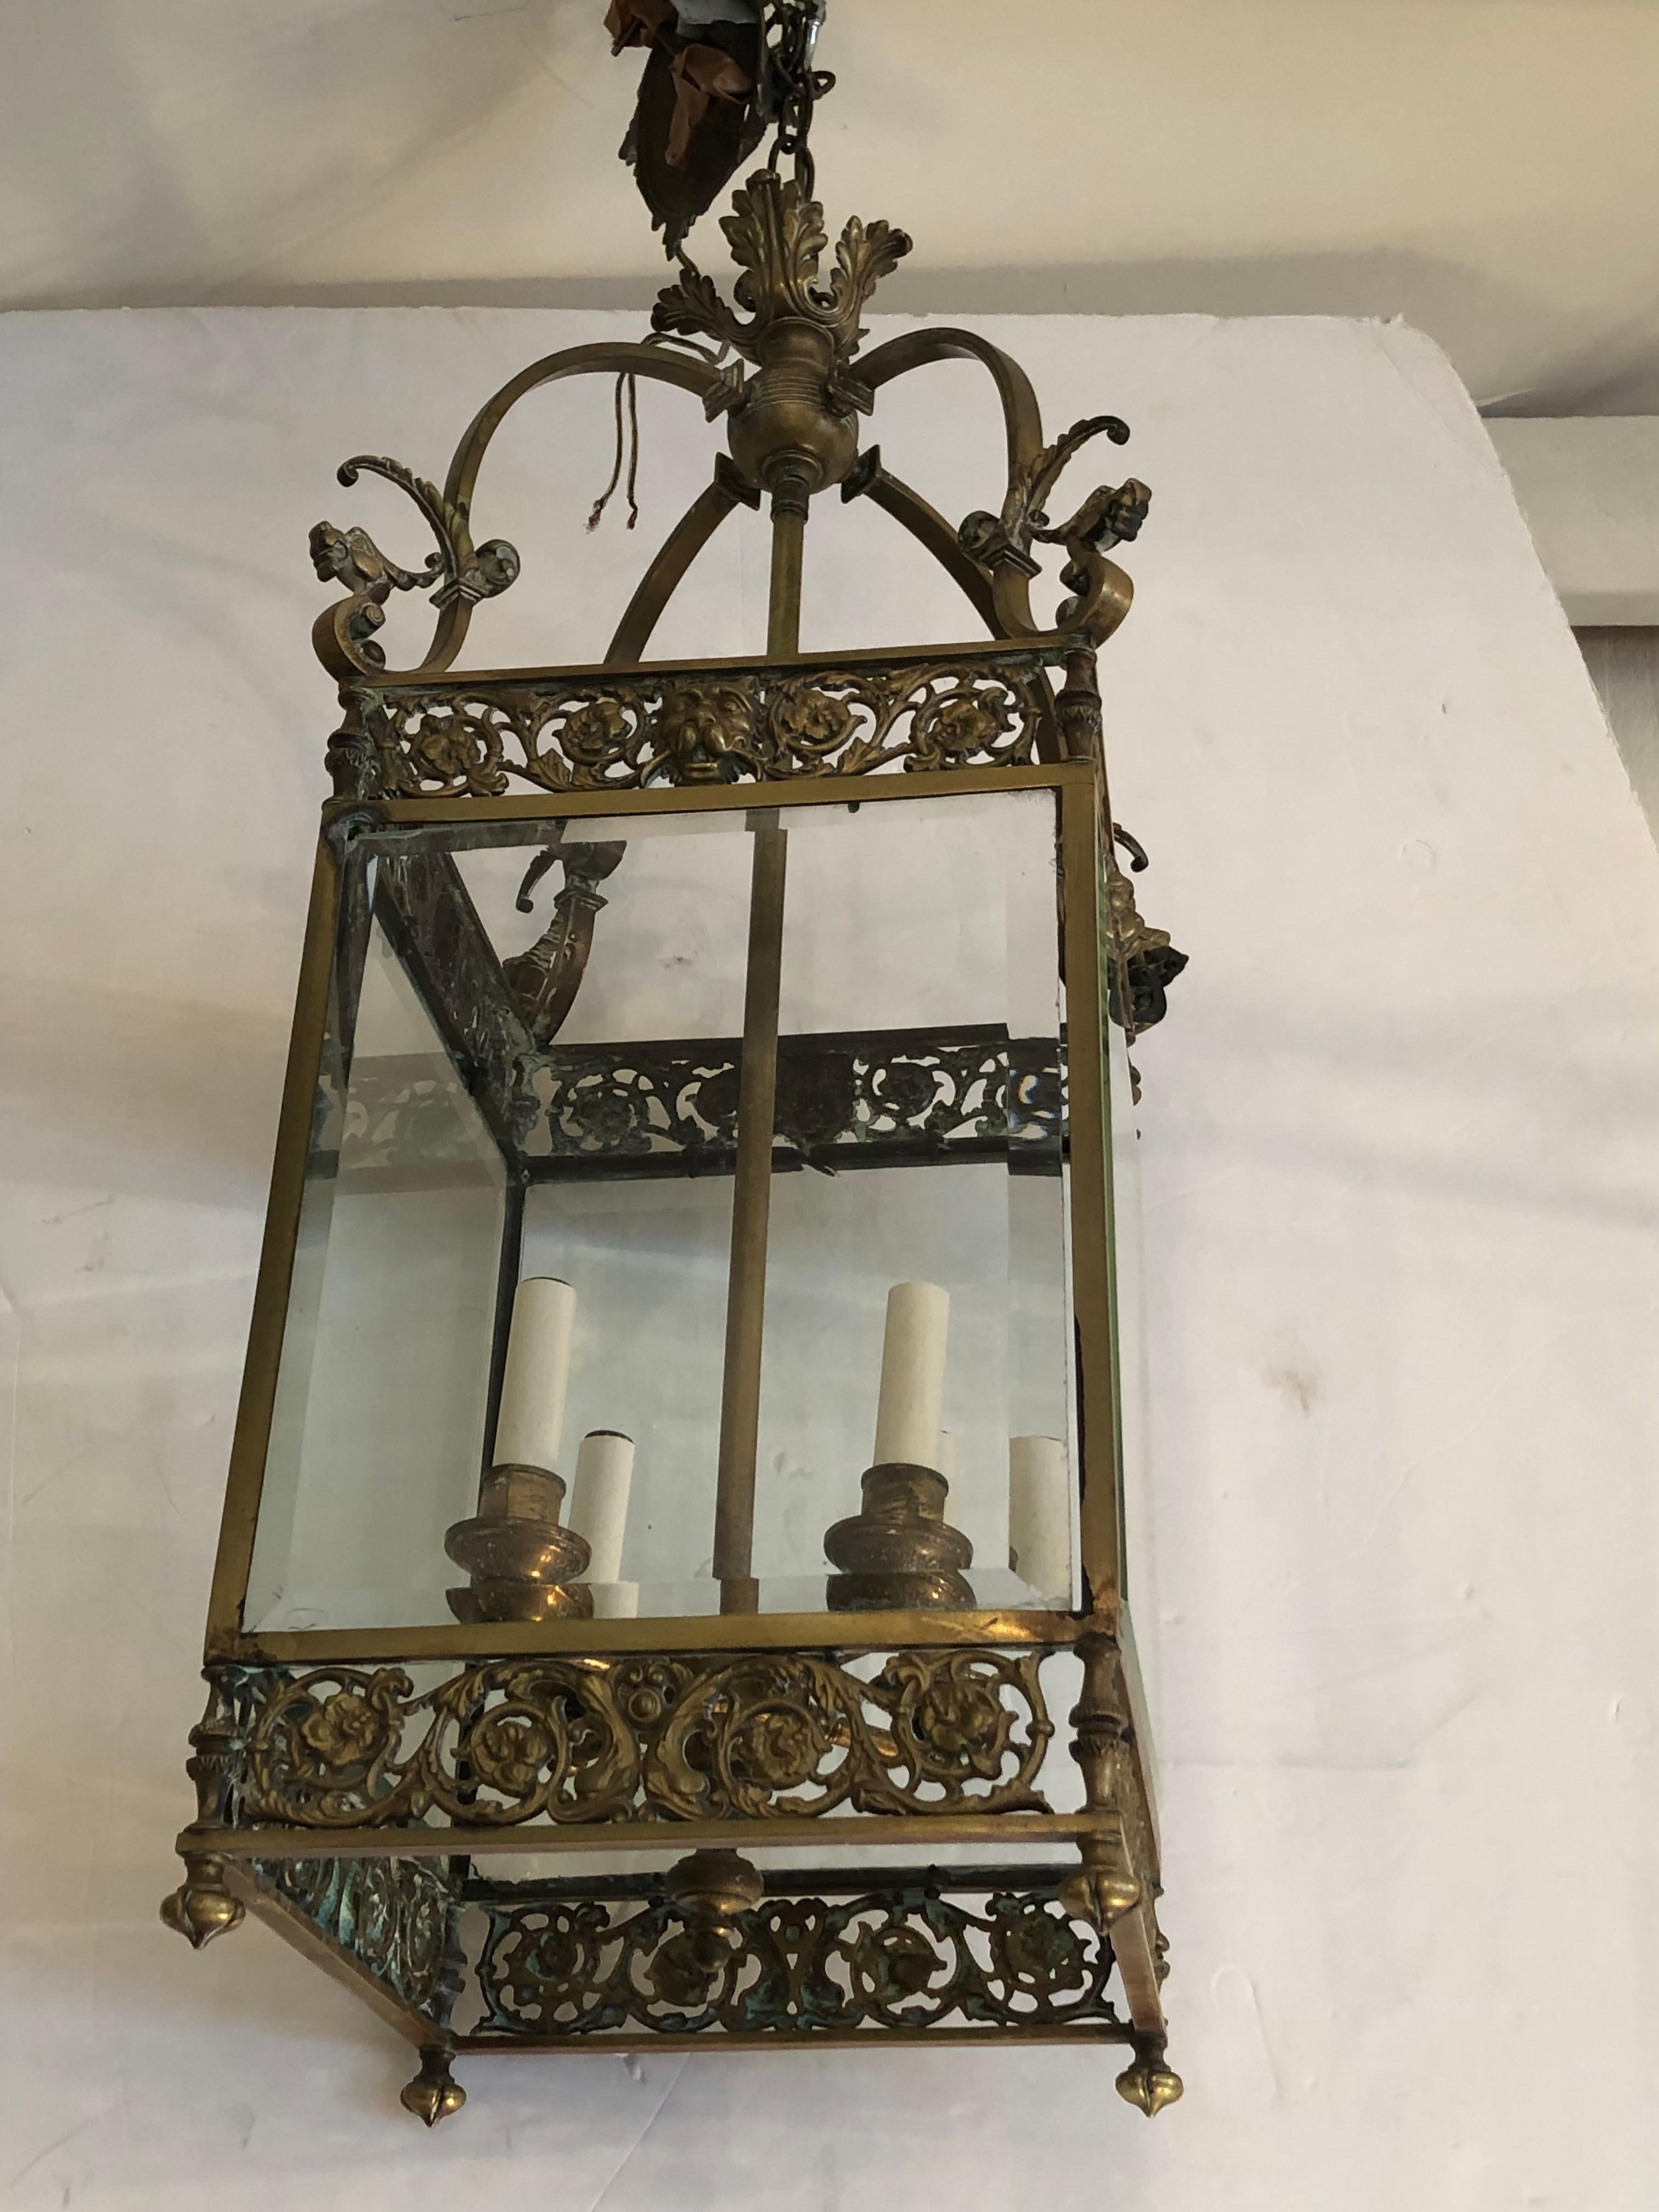 Antique English Bronze Regency Lantern Chandelier with Lion Heads and Griffins For Sale 6